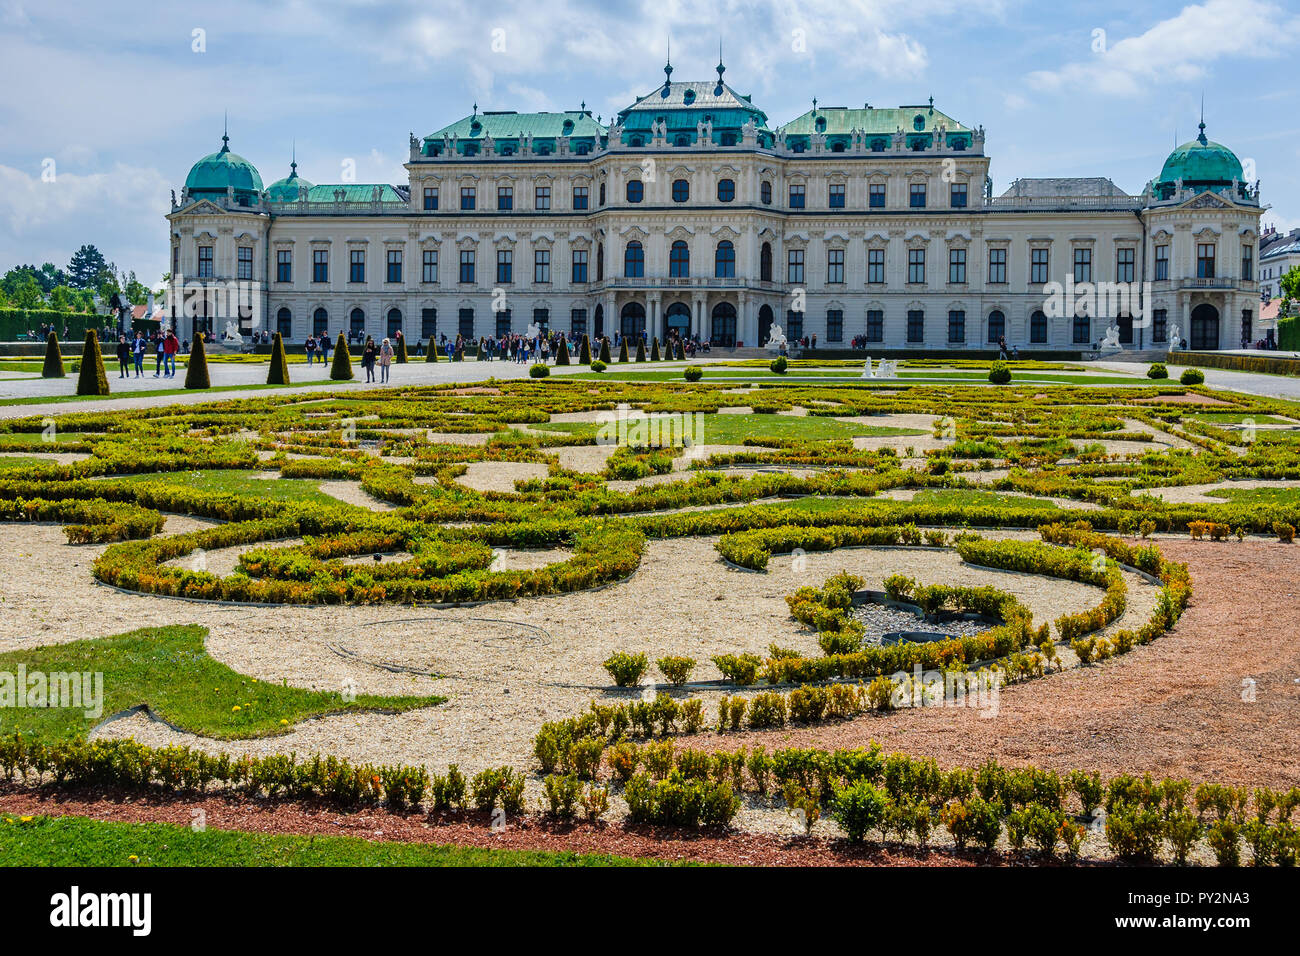 The garden of Belvedere Palace in the city of Vienna, Austria Stock Photo